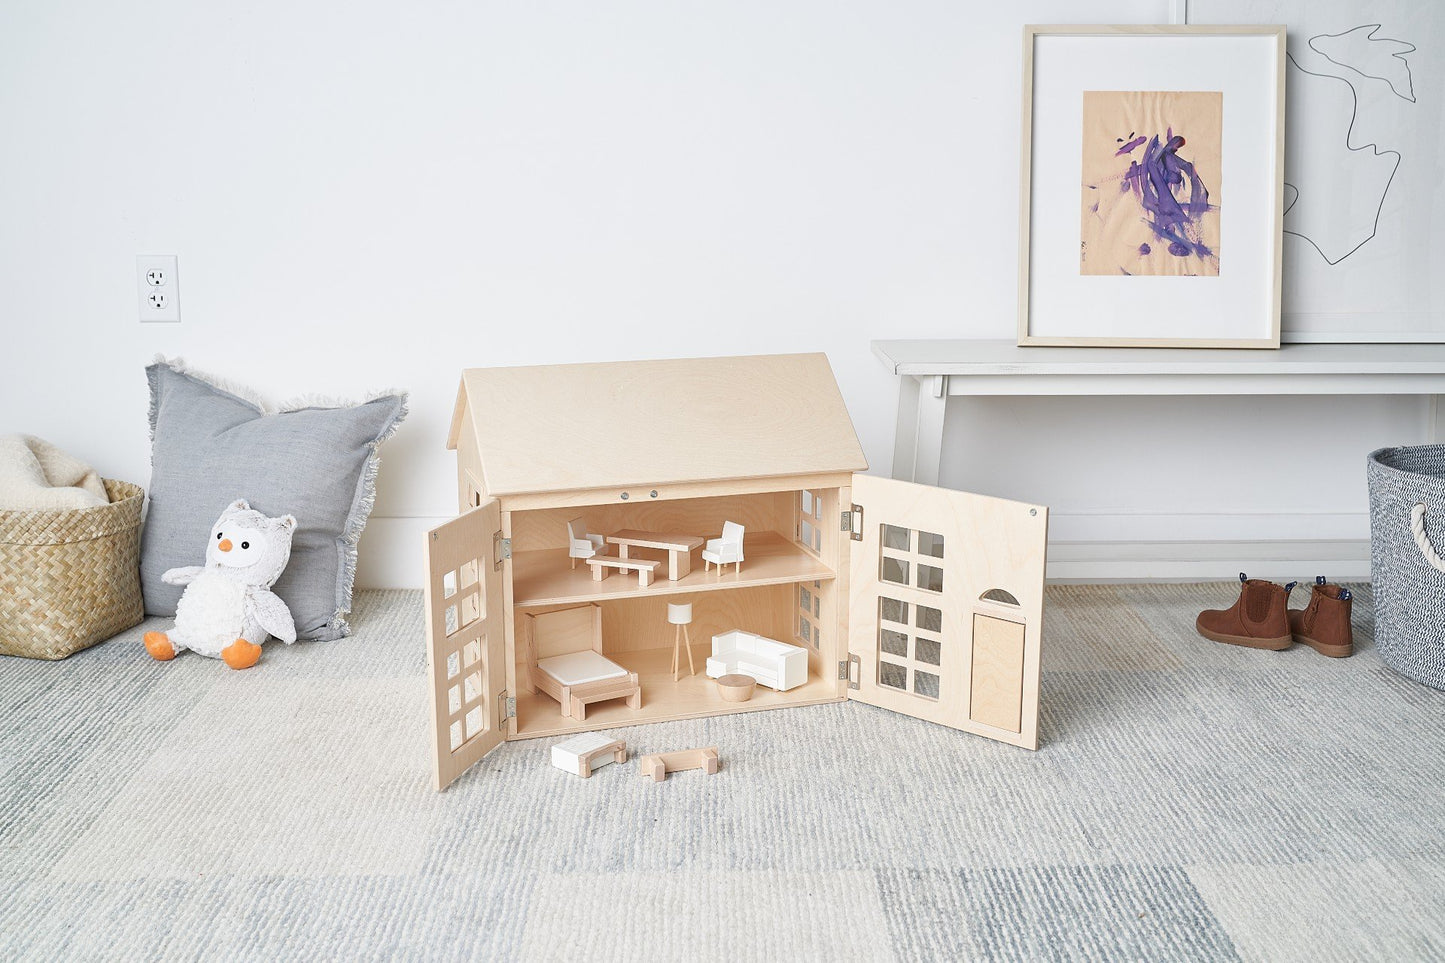 Hudson dollhouse by Milton and Goose open in playroom